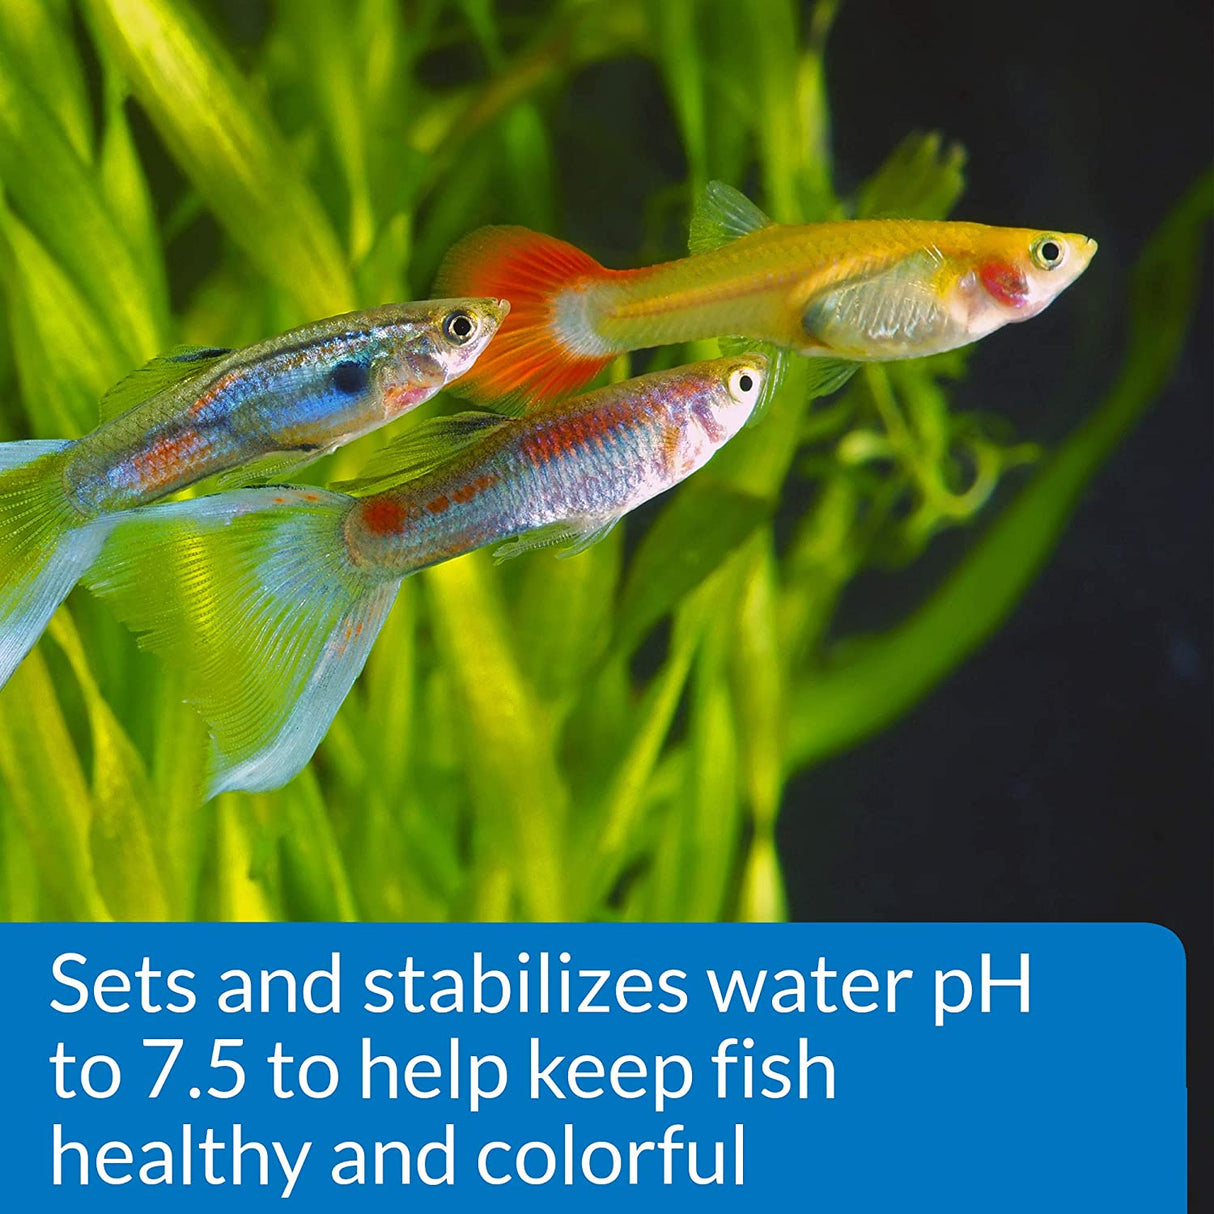 pH 7.5 - 5 count API Proper pH Sets and Stabilizes Freshwater Aquariums